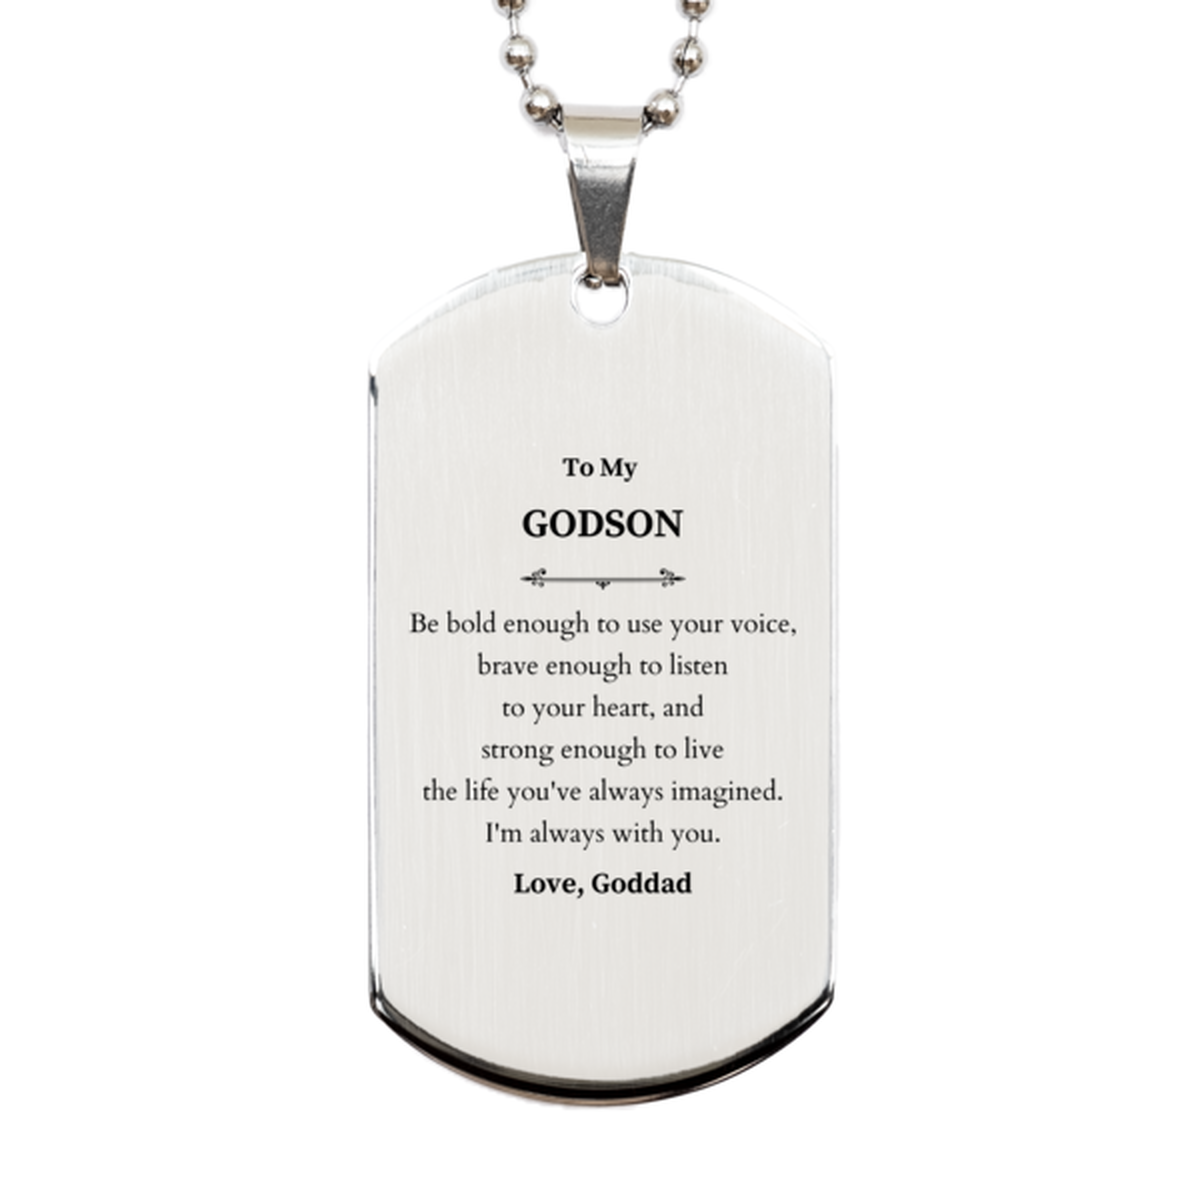 Keepsake Godson Silver Dog Tag Gift Idea Graduation Christmas Birthday Godson from Goddad, Godson Be bold enough to use your voice, brave enough to listen to your heart. Love, Goddad